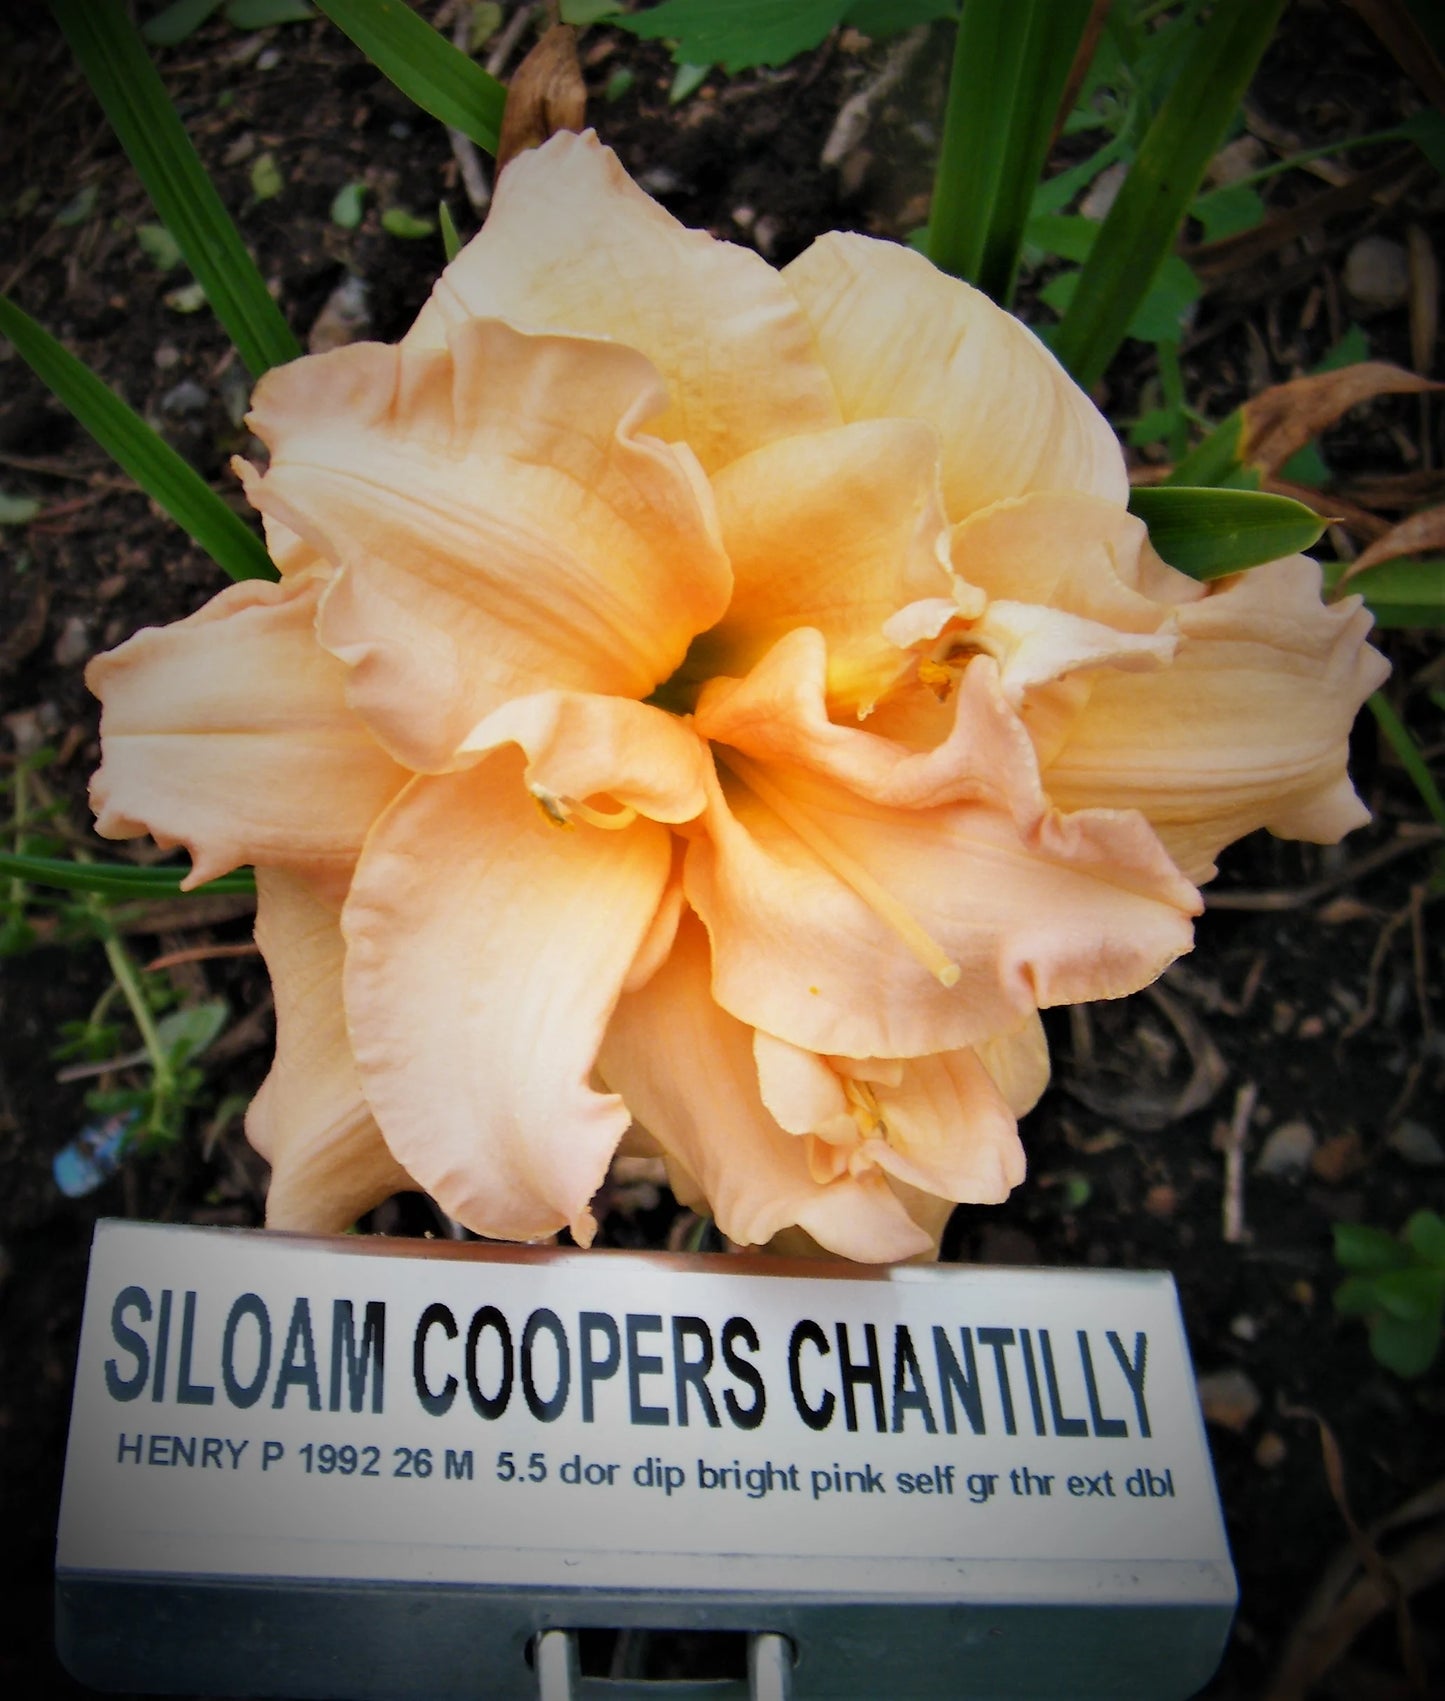 SILOAM COOPERS CHANTILLY